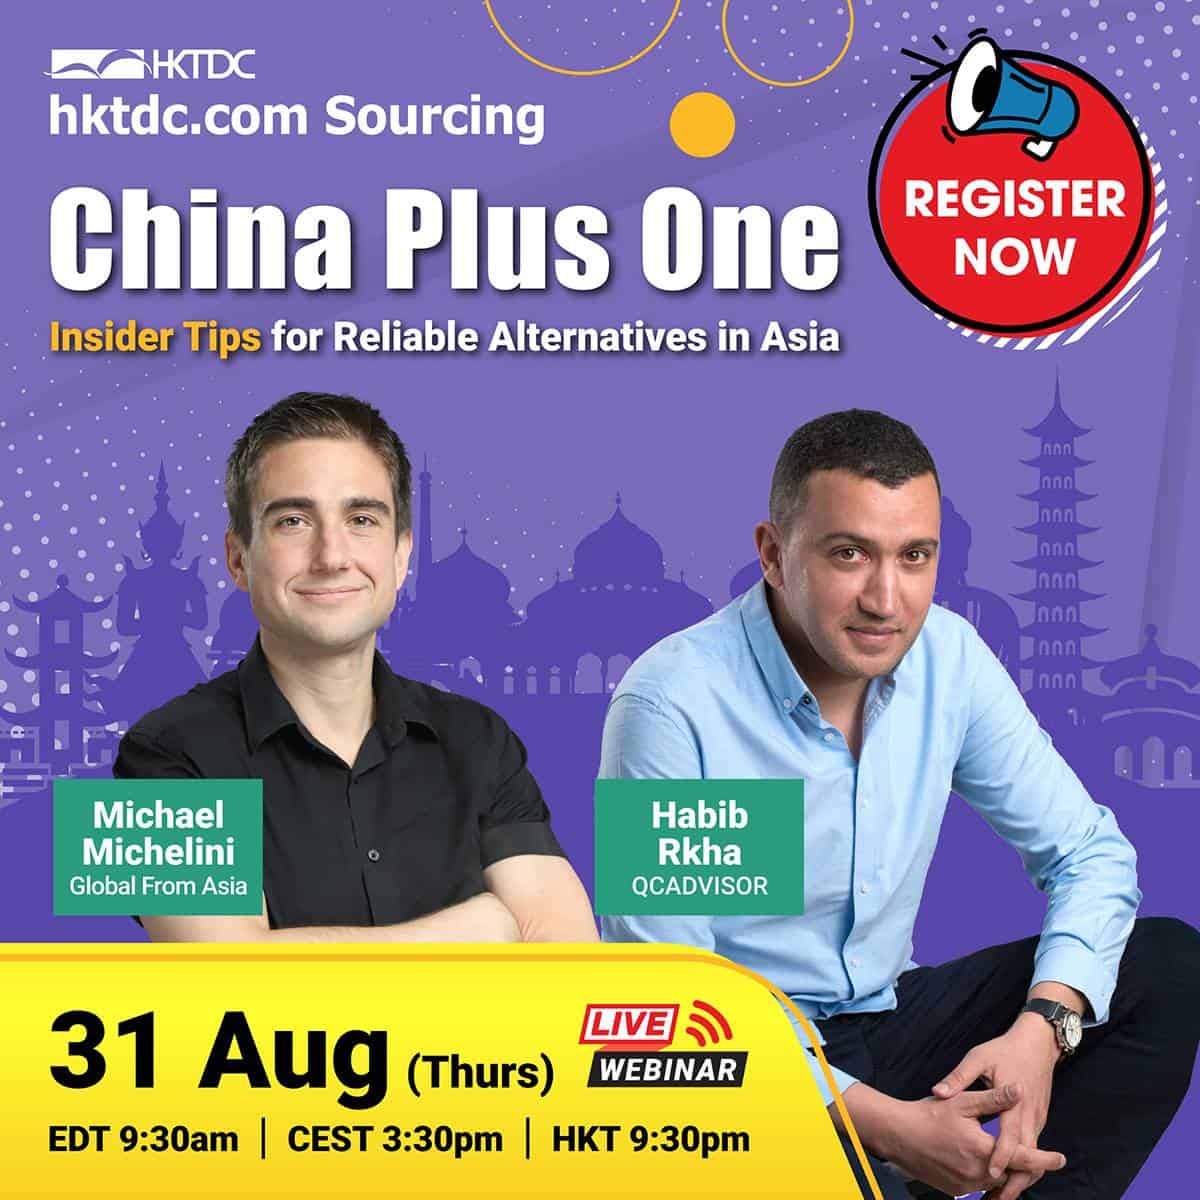 China Plus One: Insider Tips for Reliable Alternatives in Asia